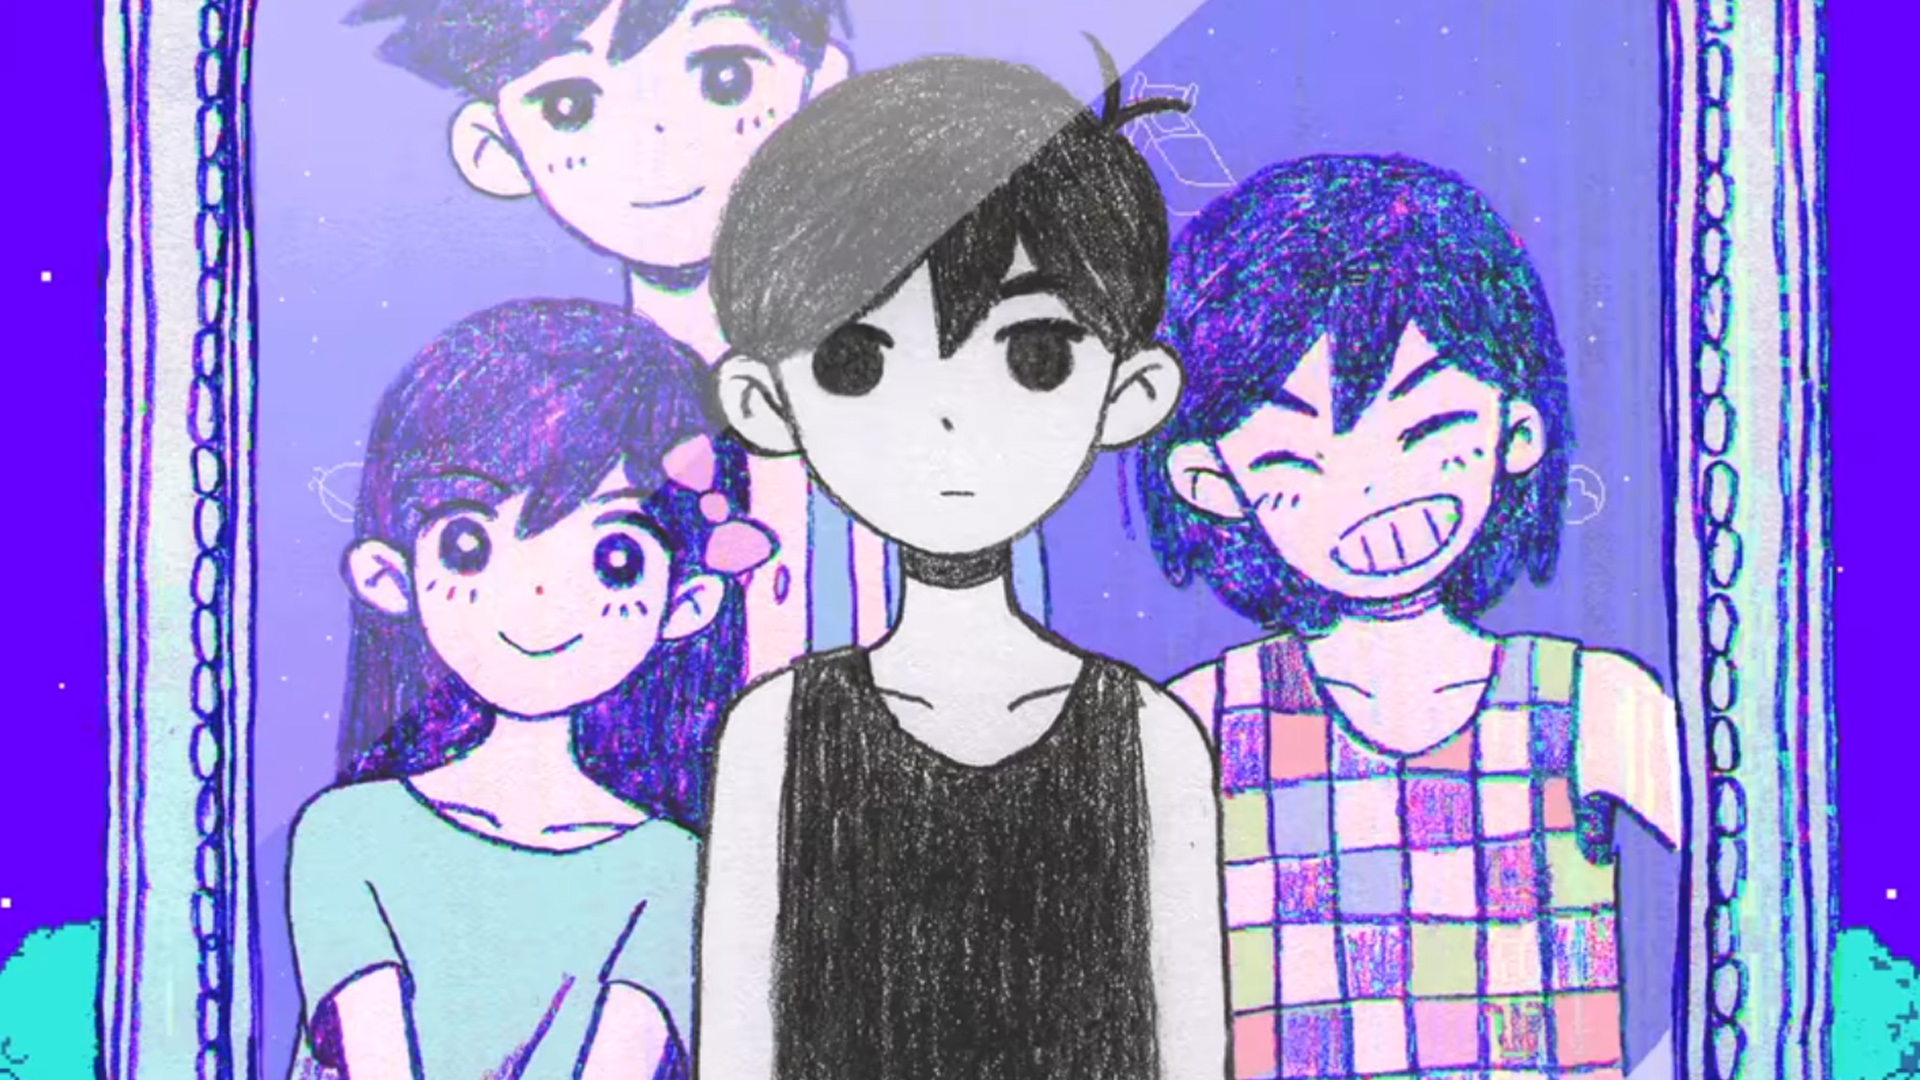 Kickstarted RPG OMORI gets a new trailer and my full attention